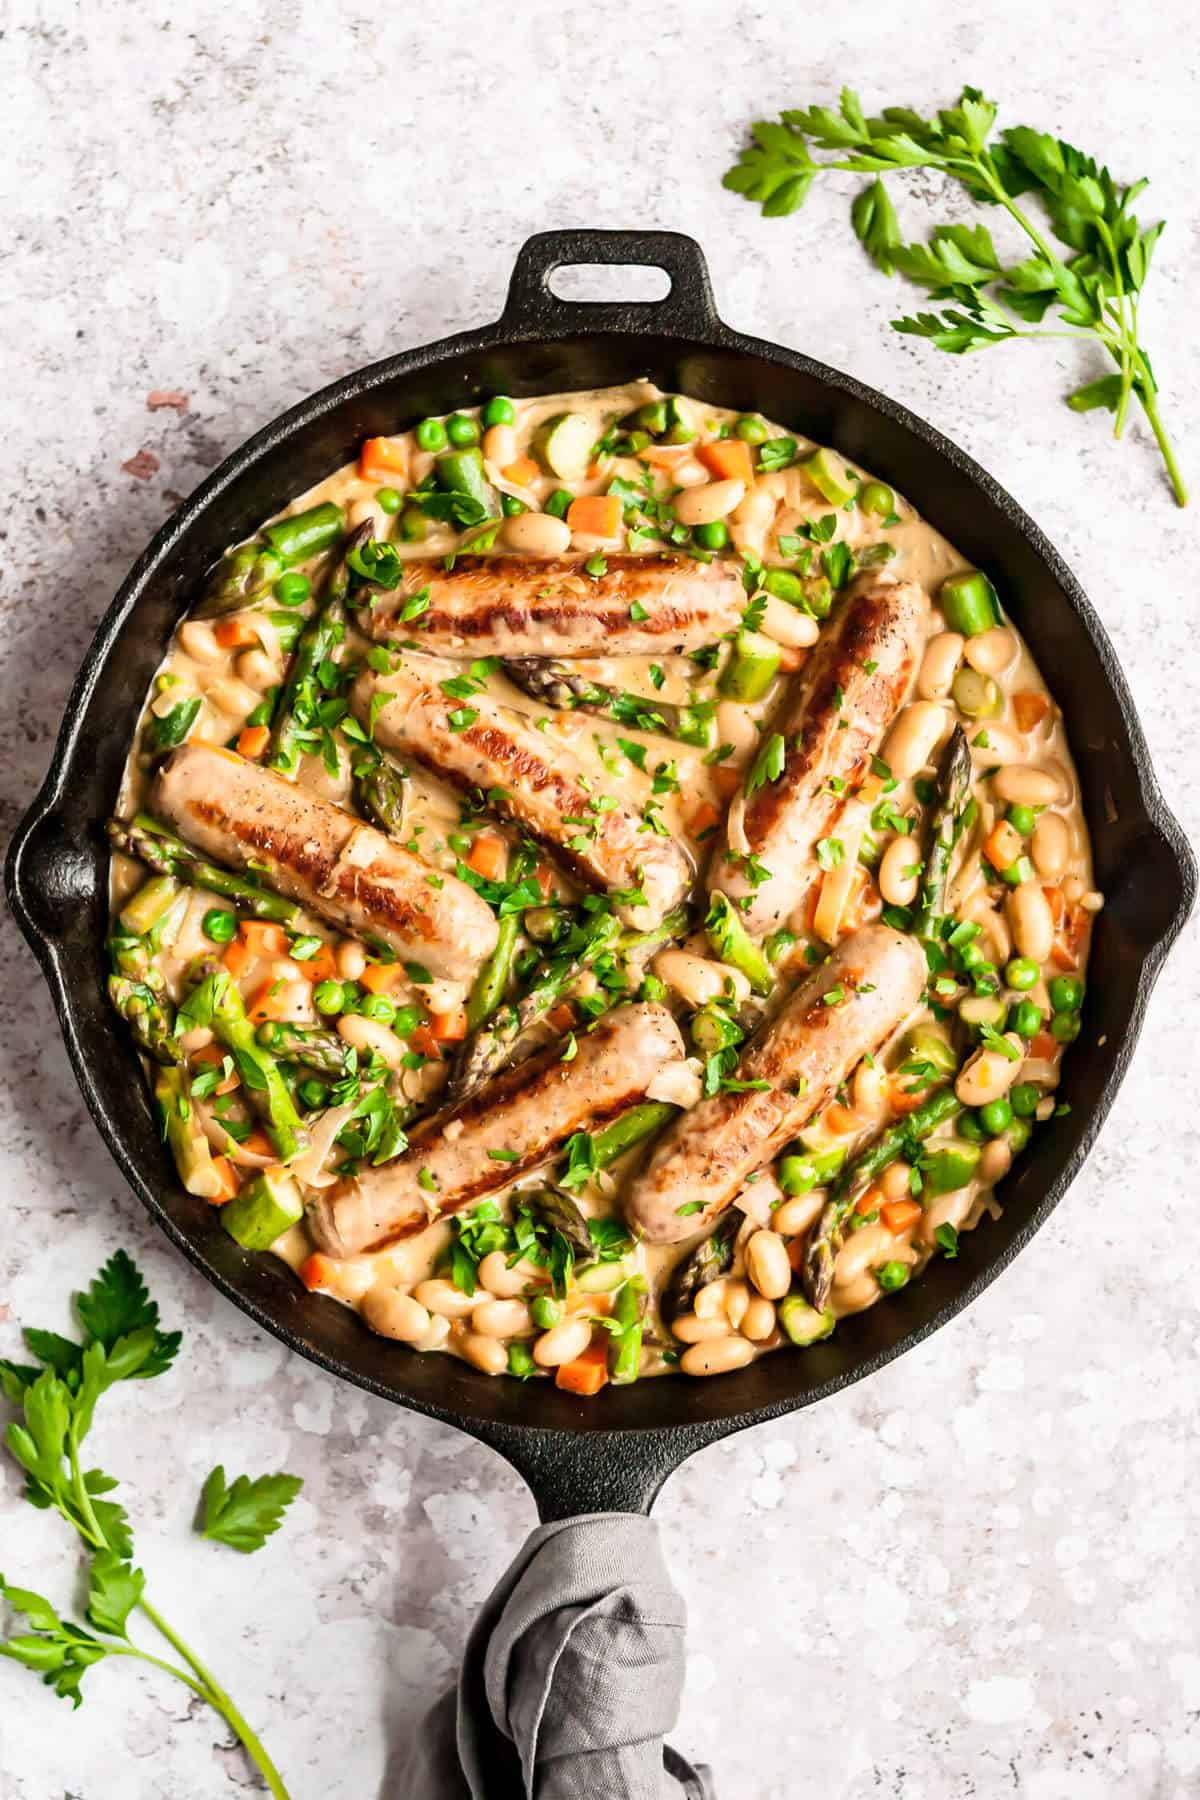 shot of finished dish of creamy chicken sausages and vegetables in a cast iron skillet